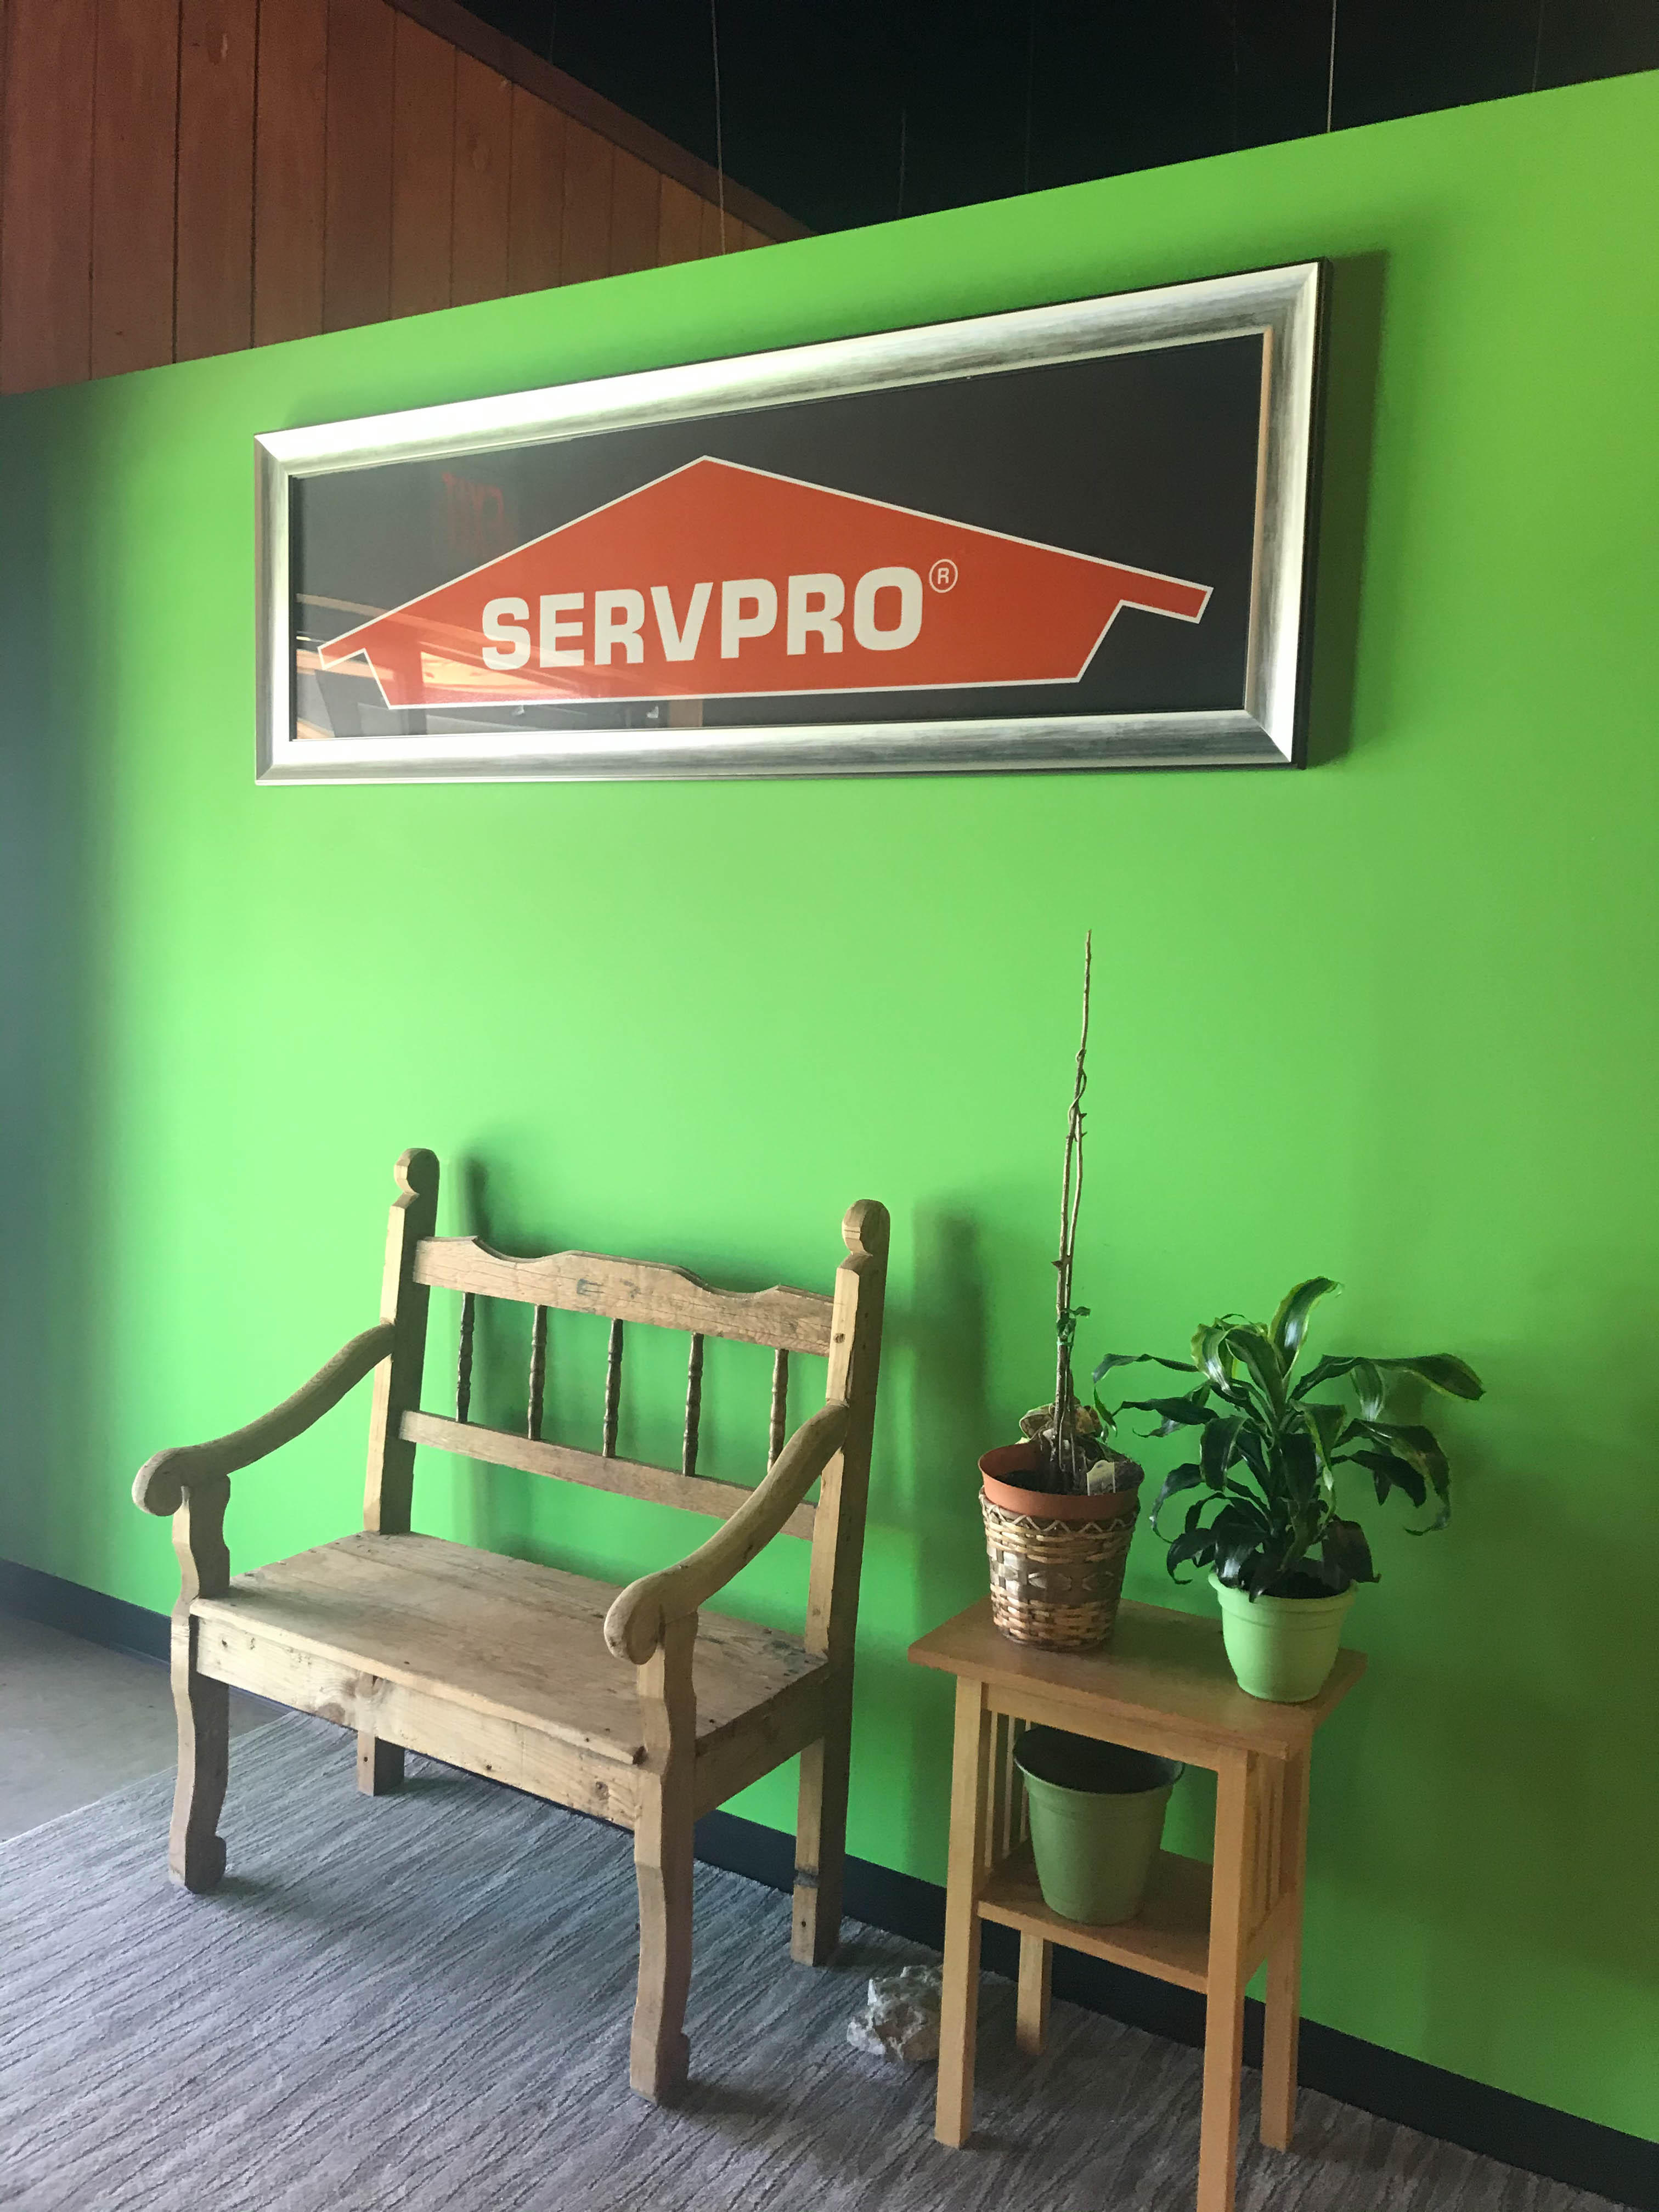 SERVPRO is here to help you 24/7/365.